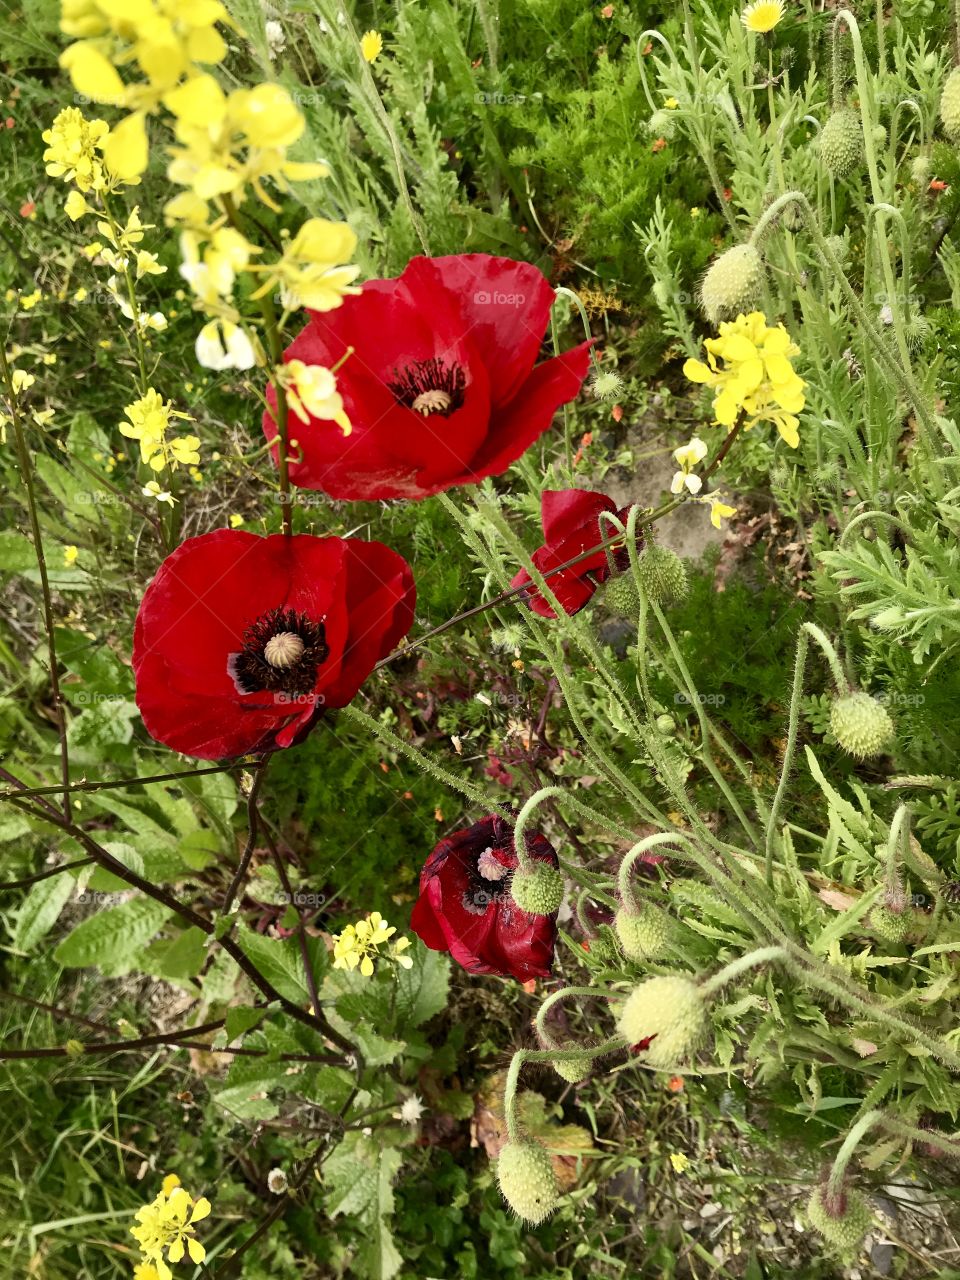 Wild poppies are my favourite part of home.